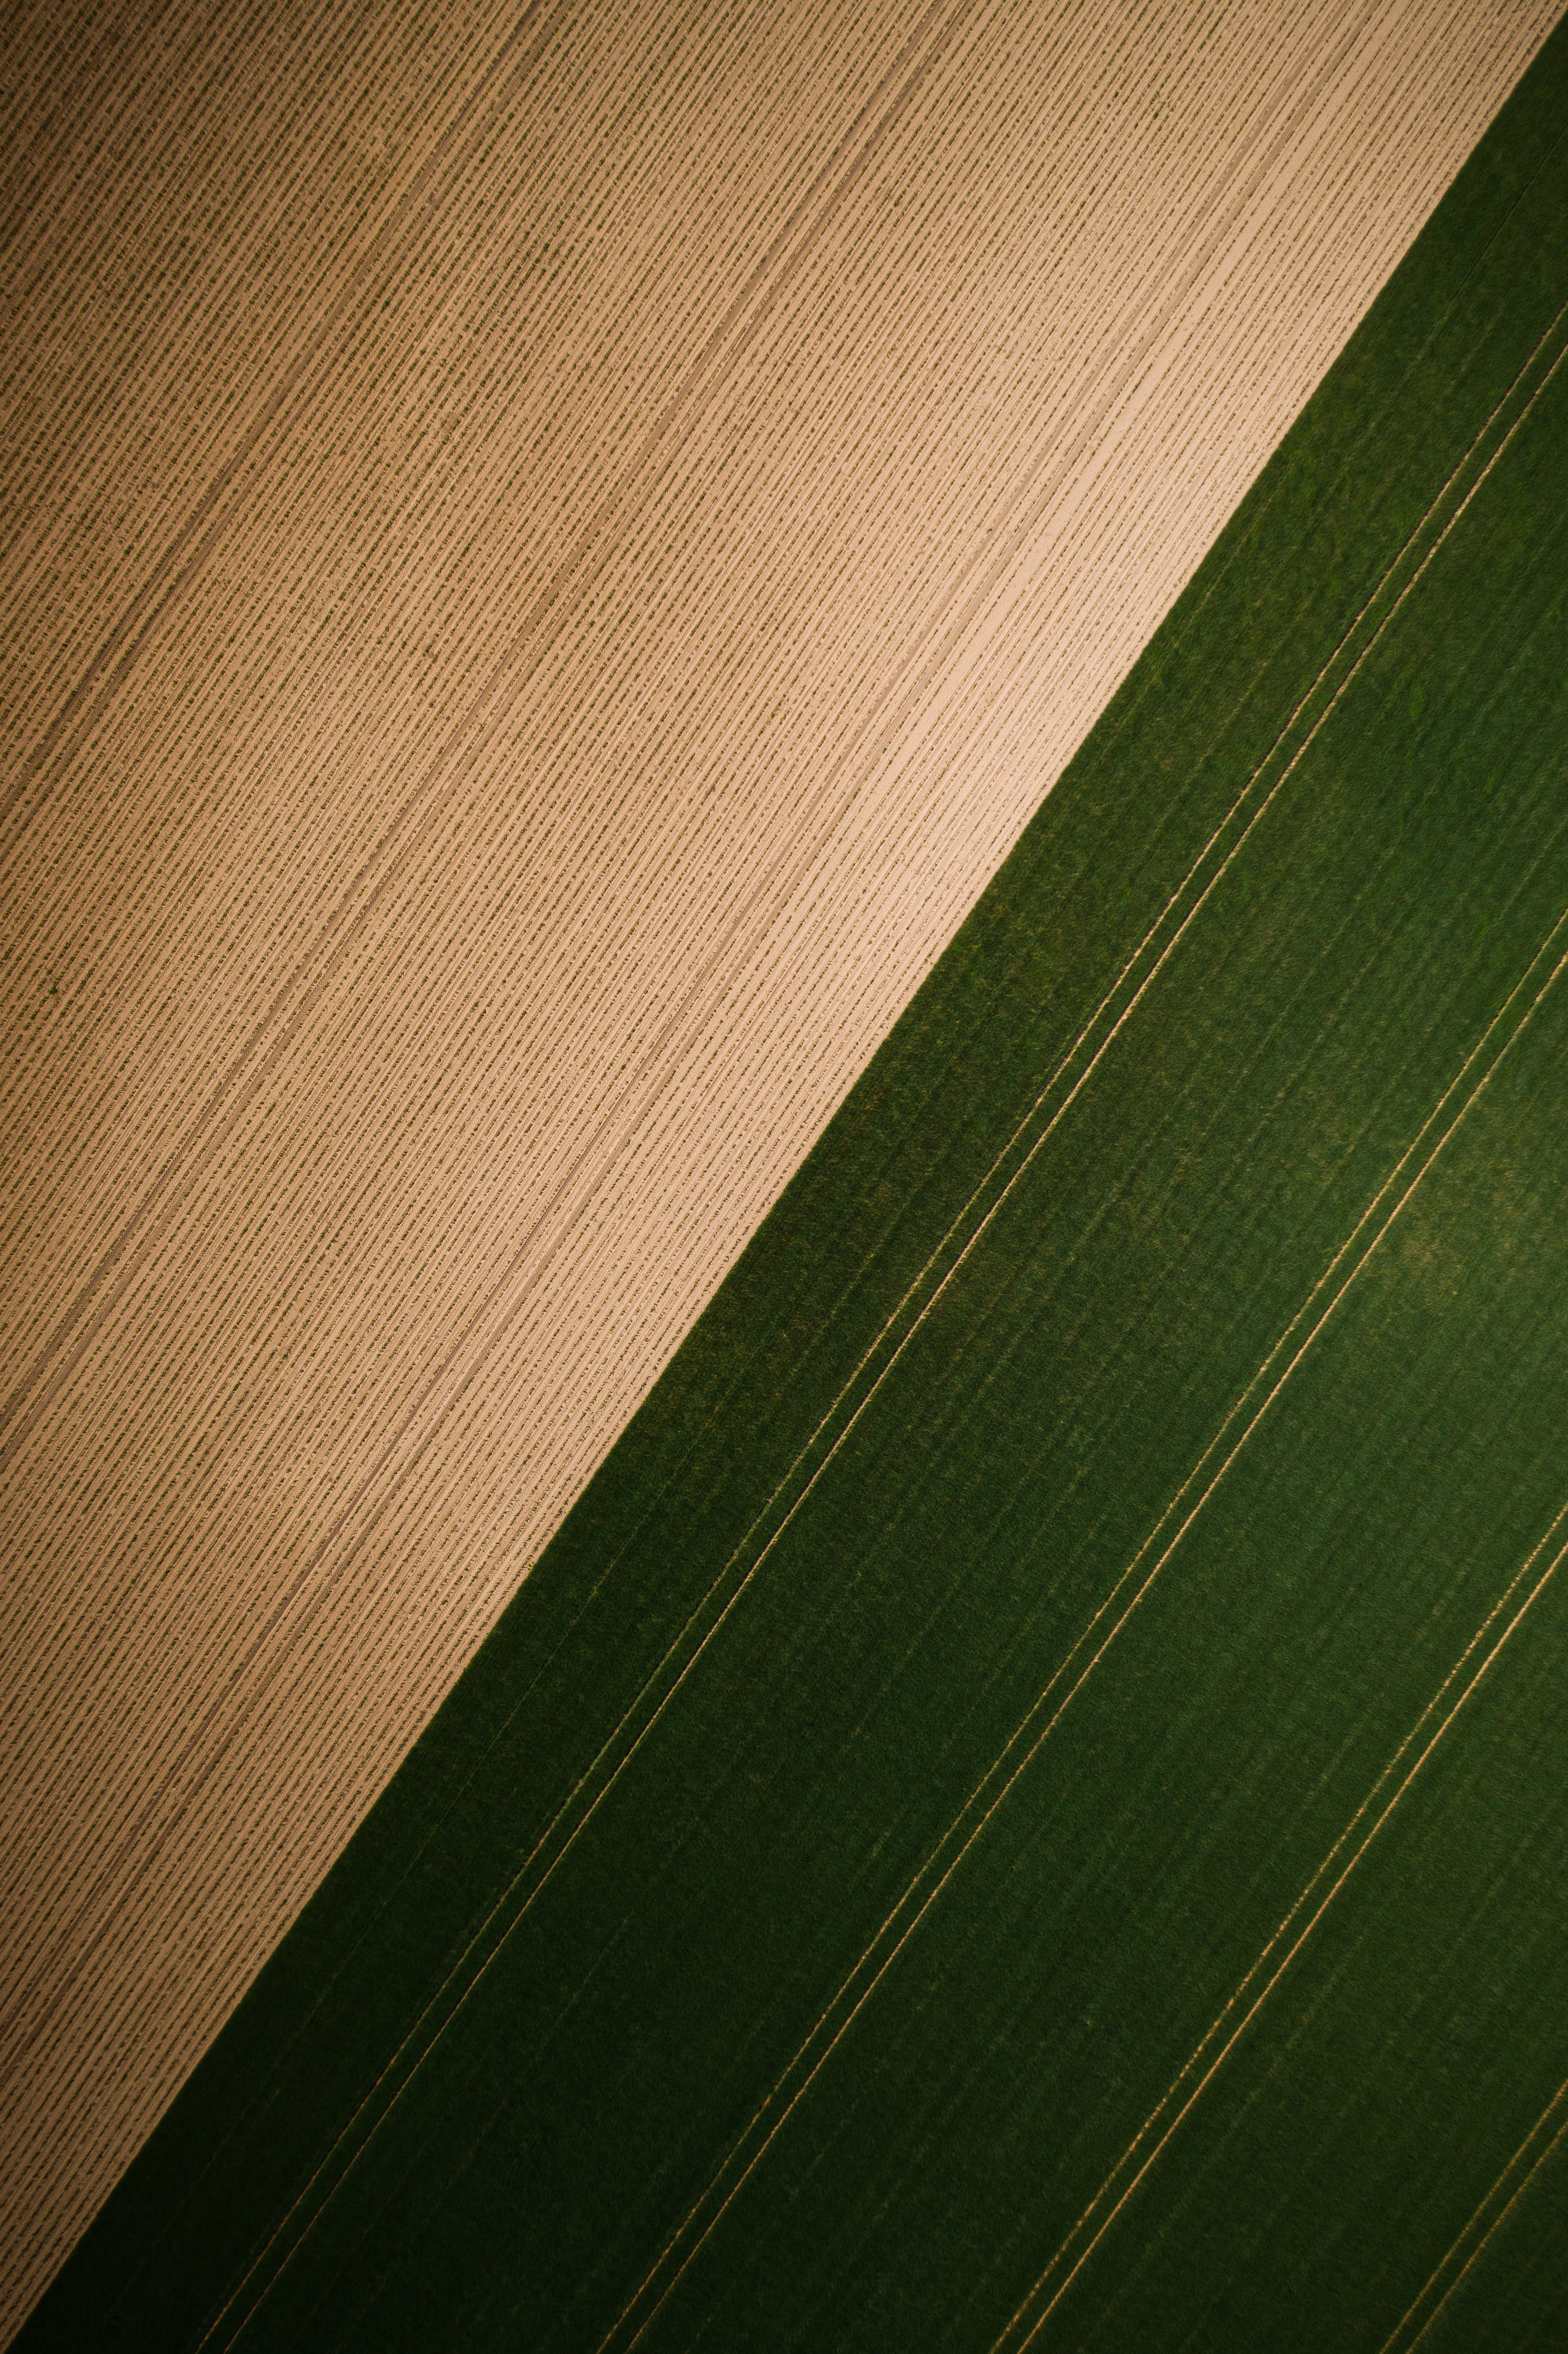 wallpapers streaks, stripes, textures, grass, view from above, texture, field